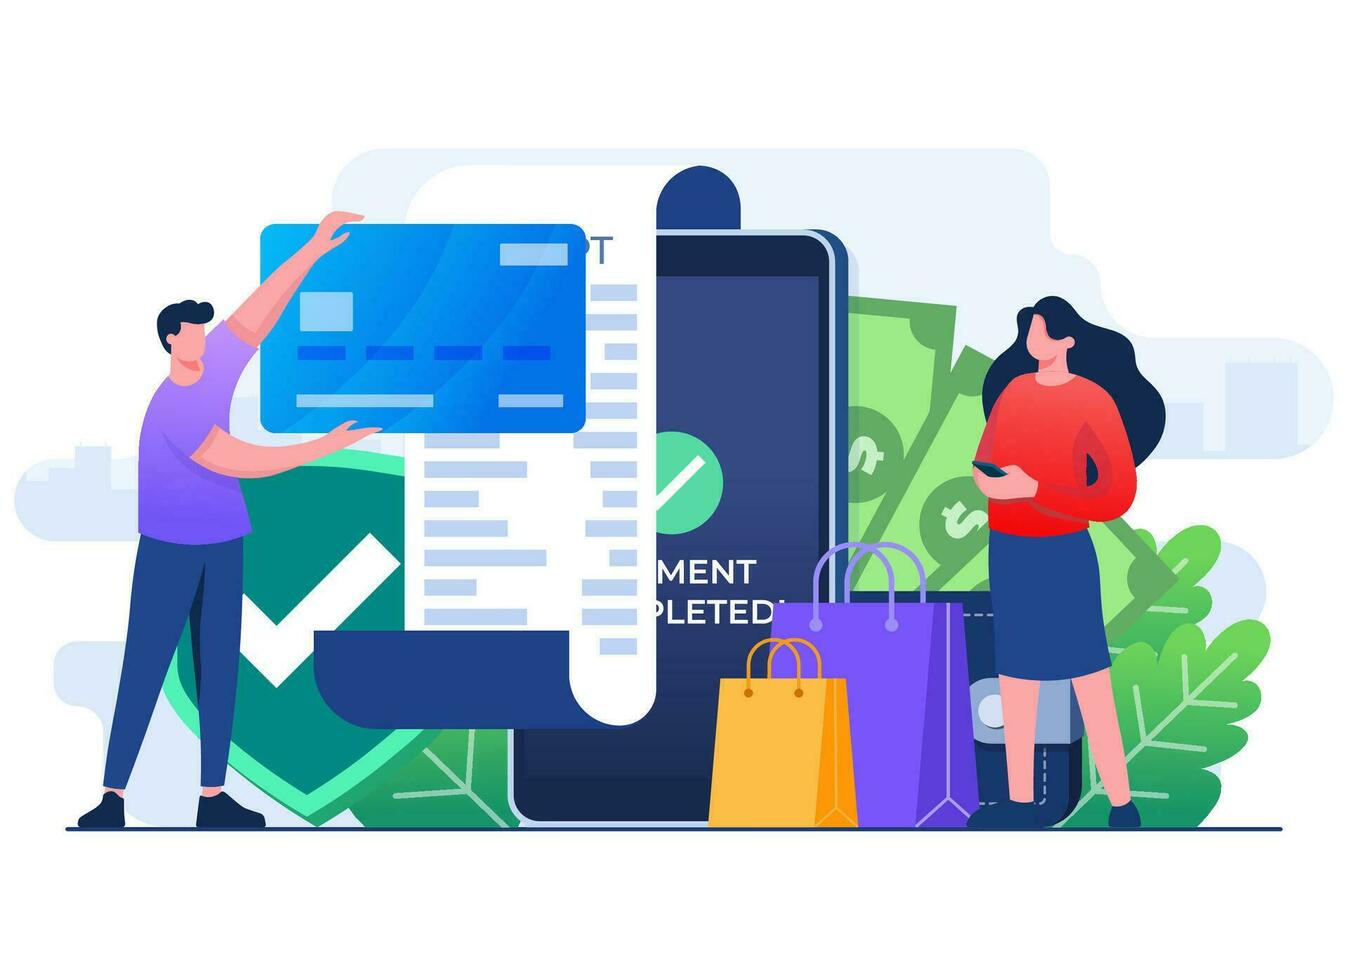 People making online payment using smartphone and credit card, Online shopping, E-commerce, Mobile banking, Cashless payment, Secure transaction, Internet banking flat vector illustration template